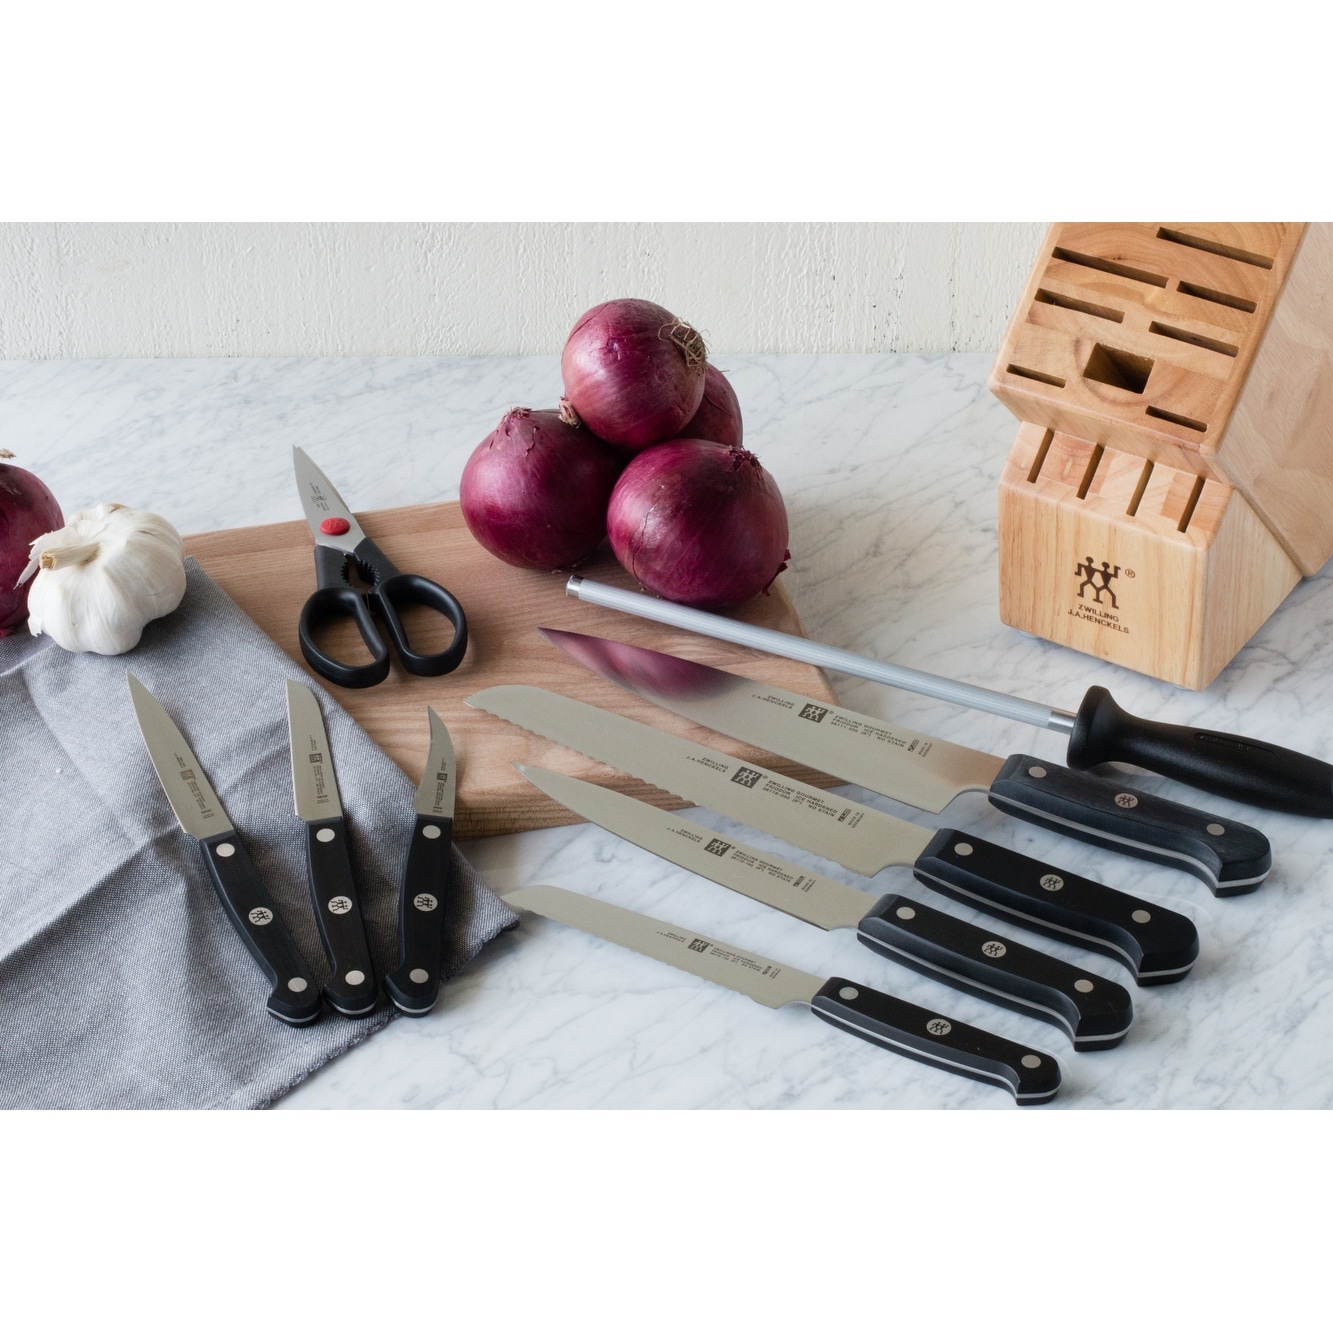 https://ak1.ostkcdn.com/images/products/is/images/direct/3564b3bb571968a7efe509998c1ca1c955679078/ZWILLING-Gourmet-10-pc-Knife-Block-Set.jpg